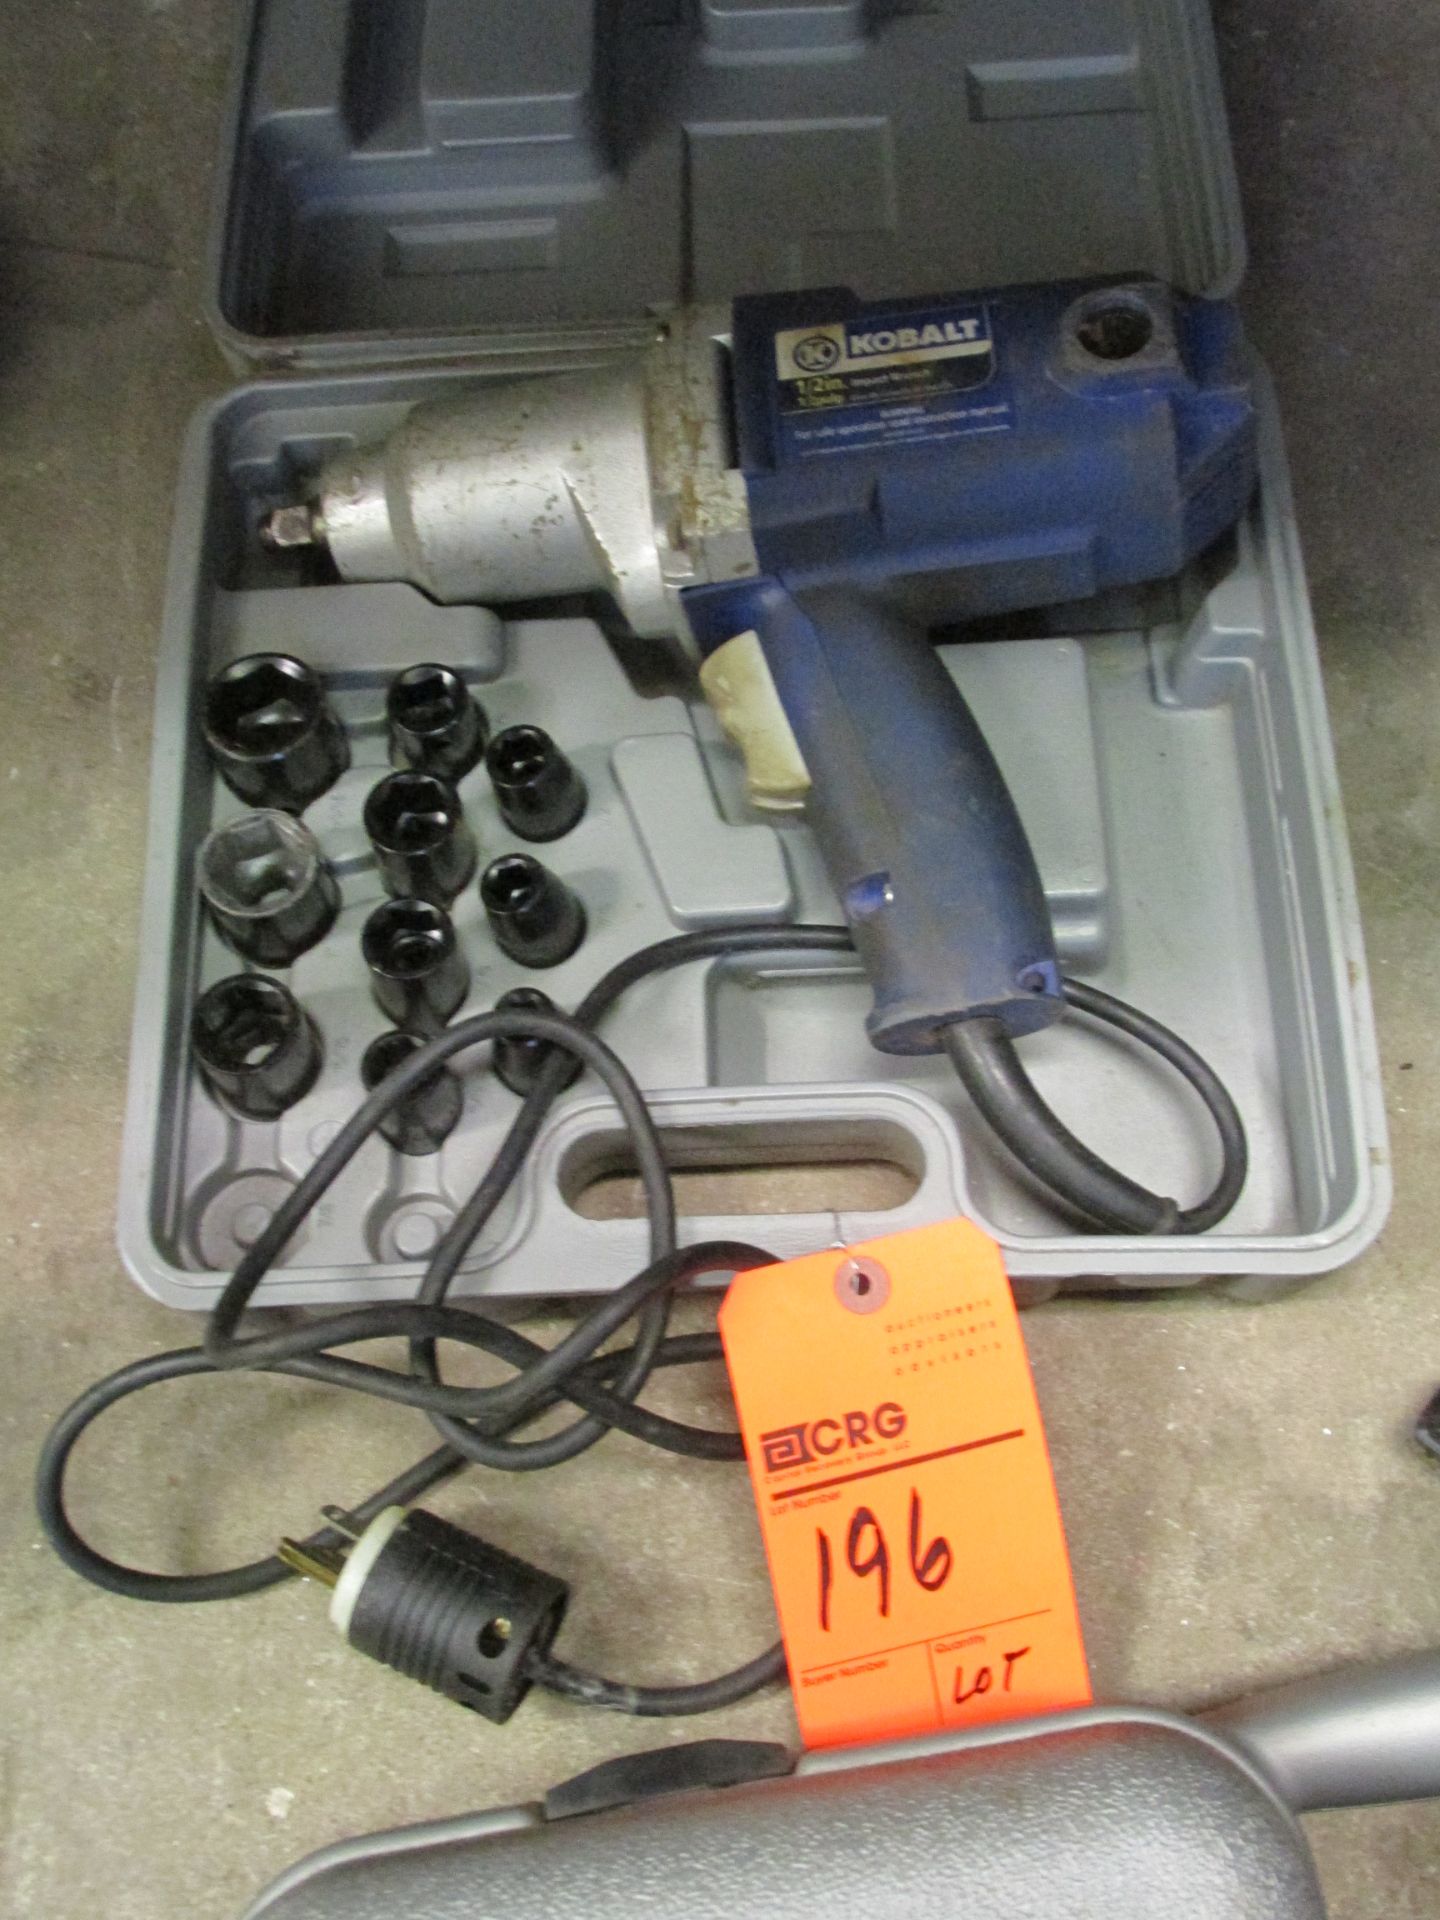 Kobalt 1/2" impact wrench with sockets and case